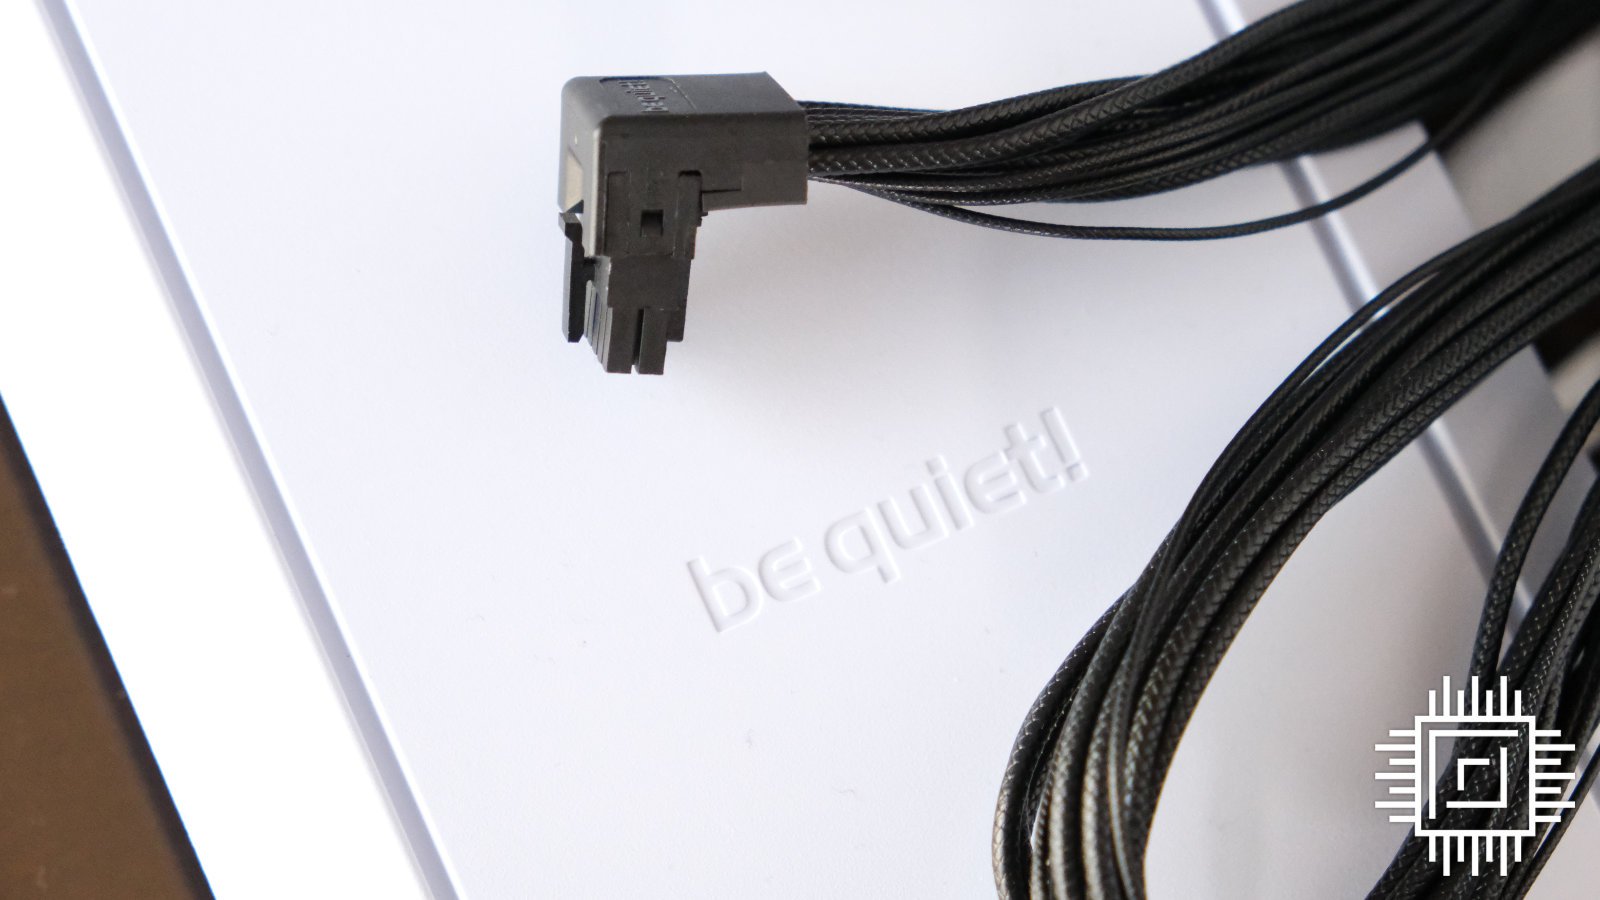 A be quiet! 12VHPWR cable with an angled head for easy connection to a compatible graphics card.